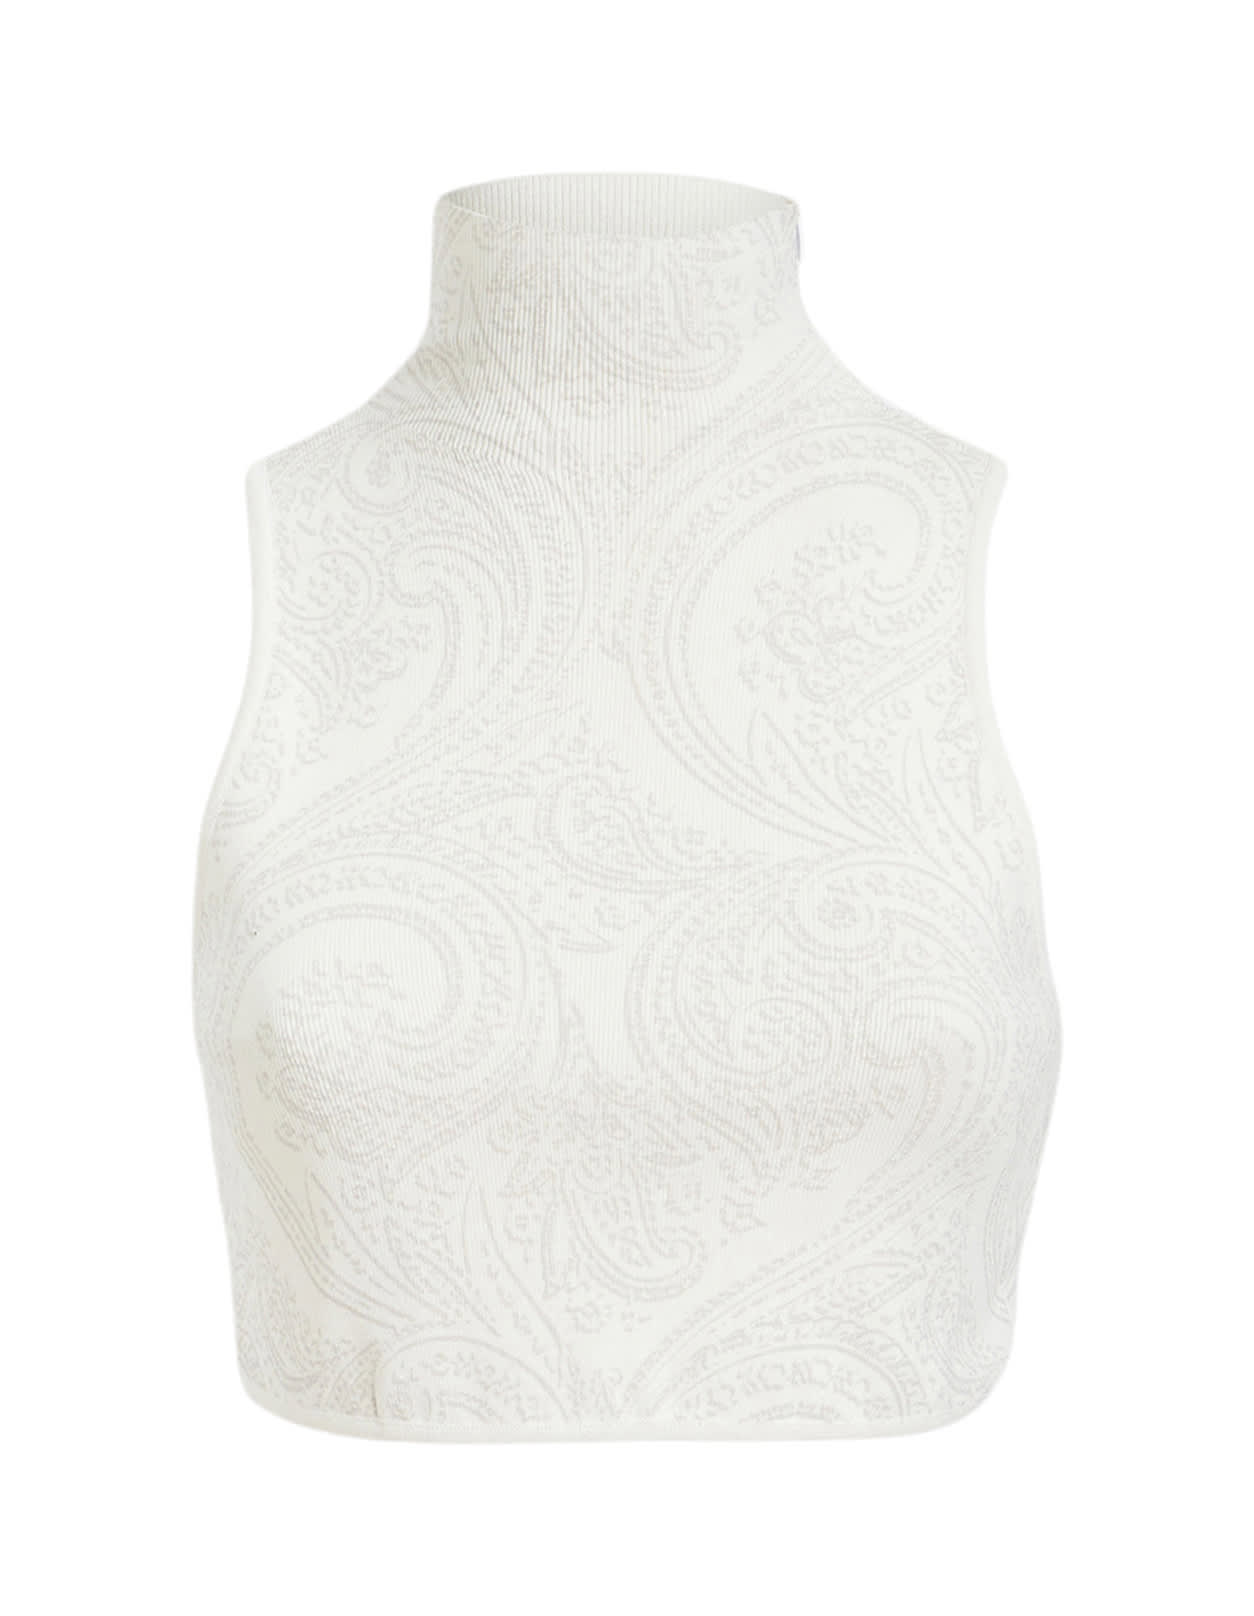 ETRO WHITE CROP TOP WITH PAISLEY PRINT